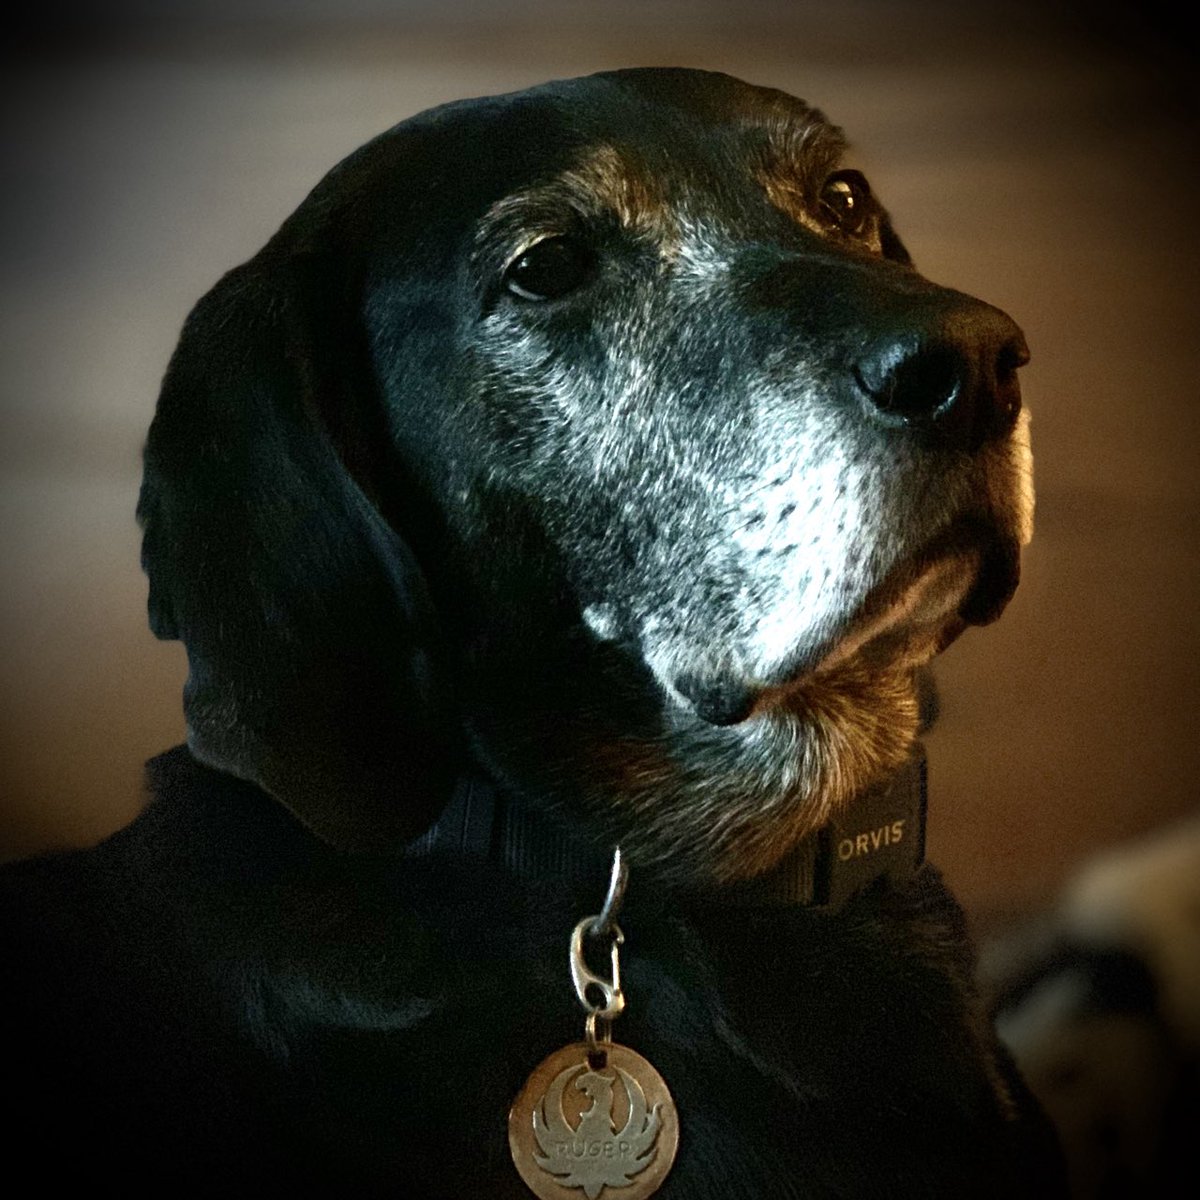 Wanted to let you know that Ruger passed away this afternoon, he was 14 years old. We initially fostered him through ⁦@cnwhnj⁩ and he got into all sorts of trouble; garbage diving, counter-surfing, howling, and ultimately he stole our hearts. He will be dearly missed. 🐾💔